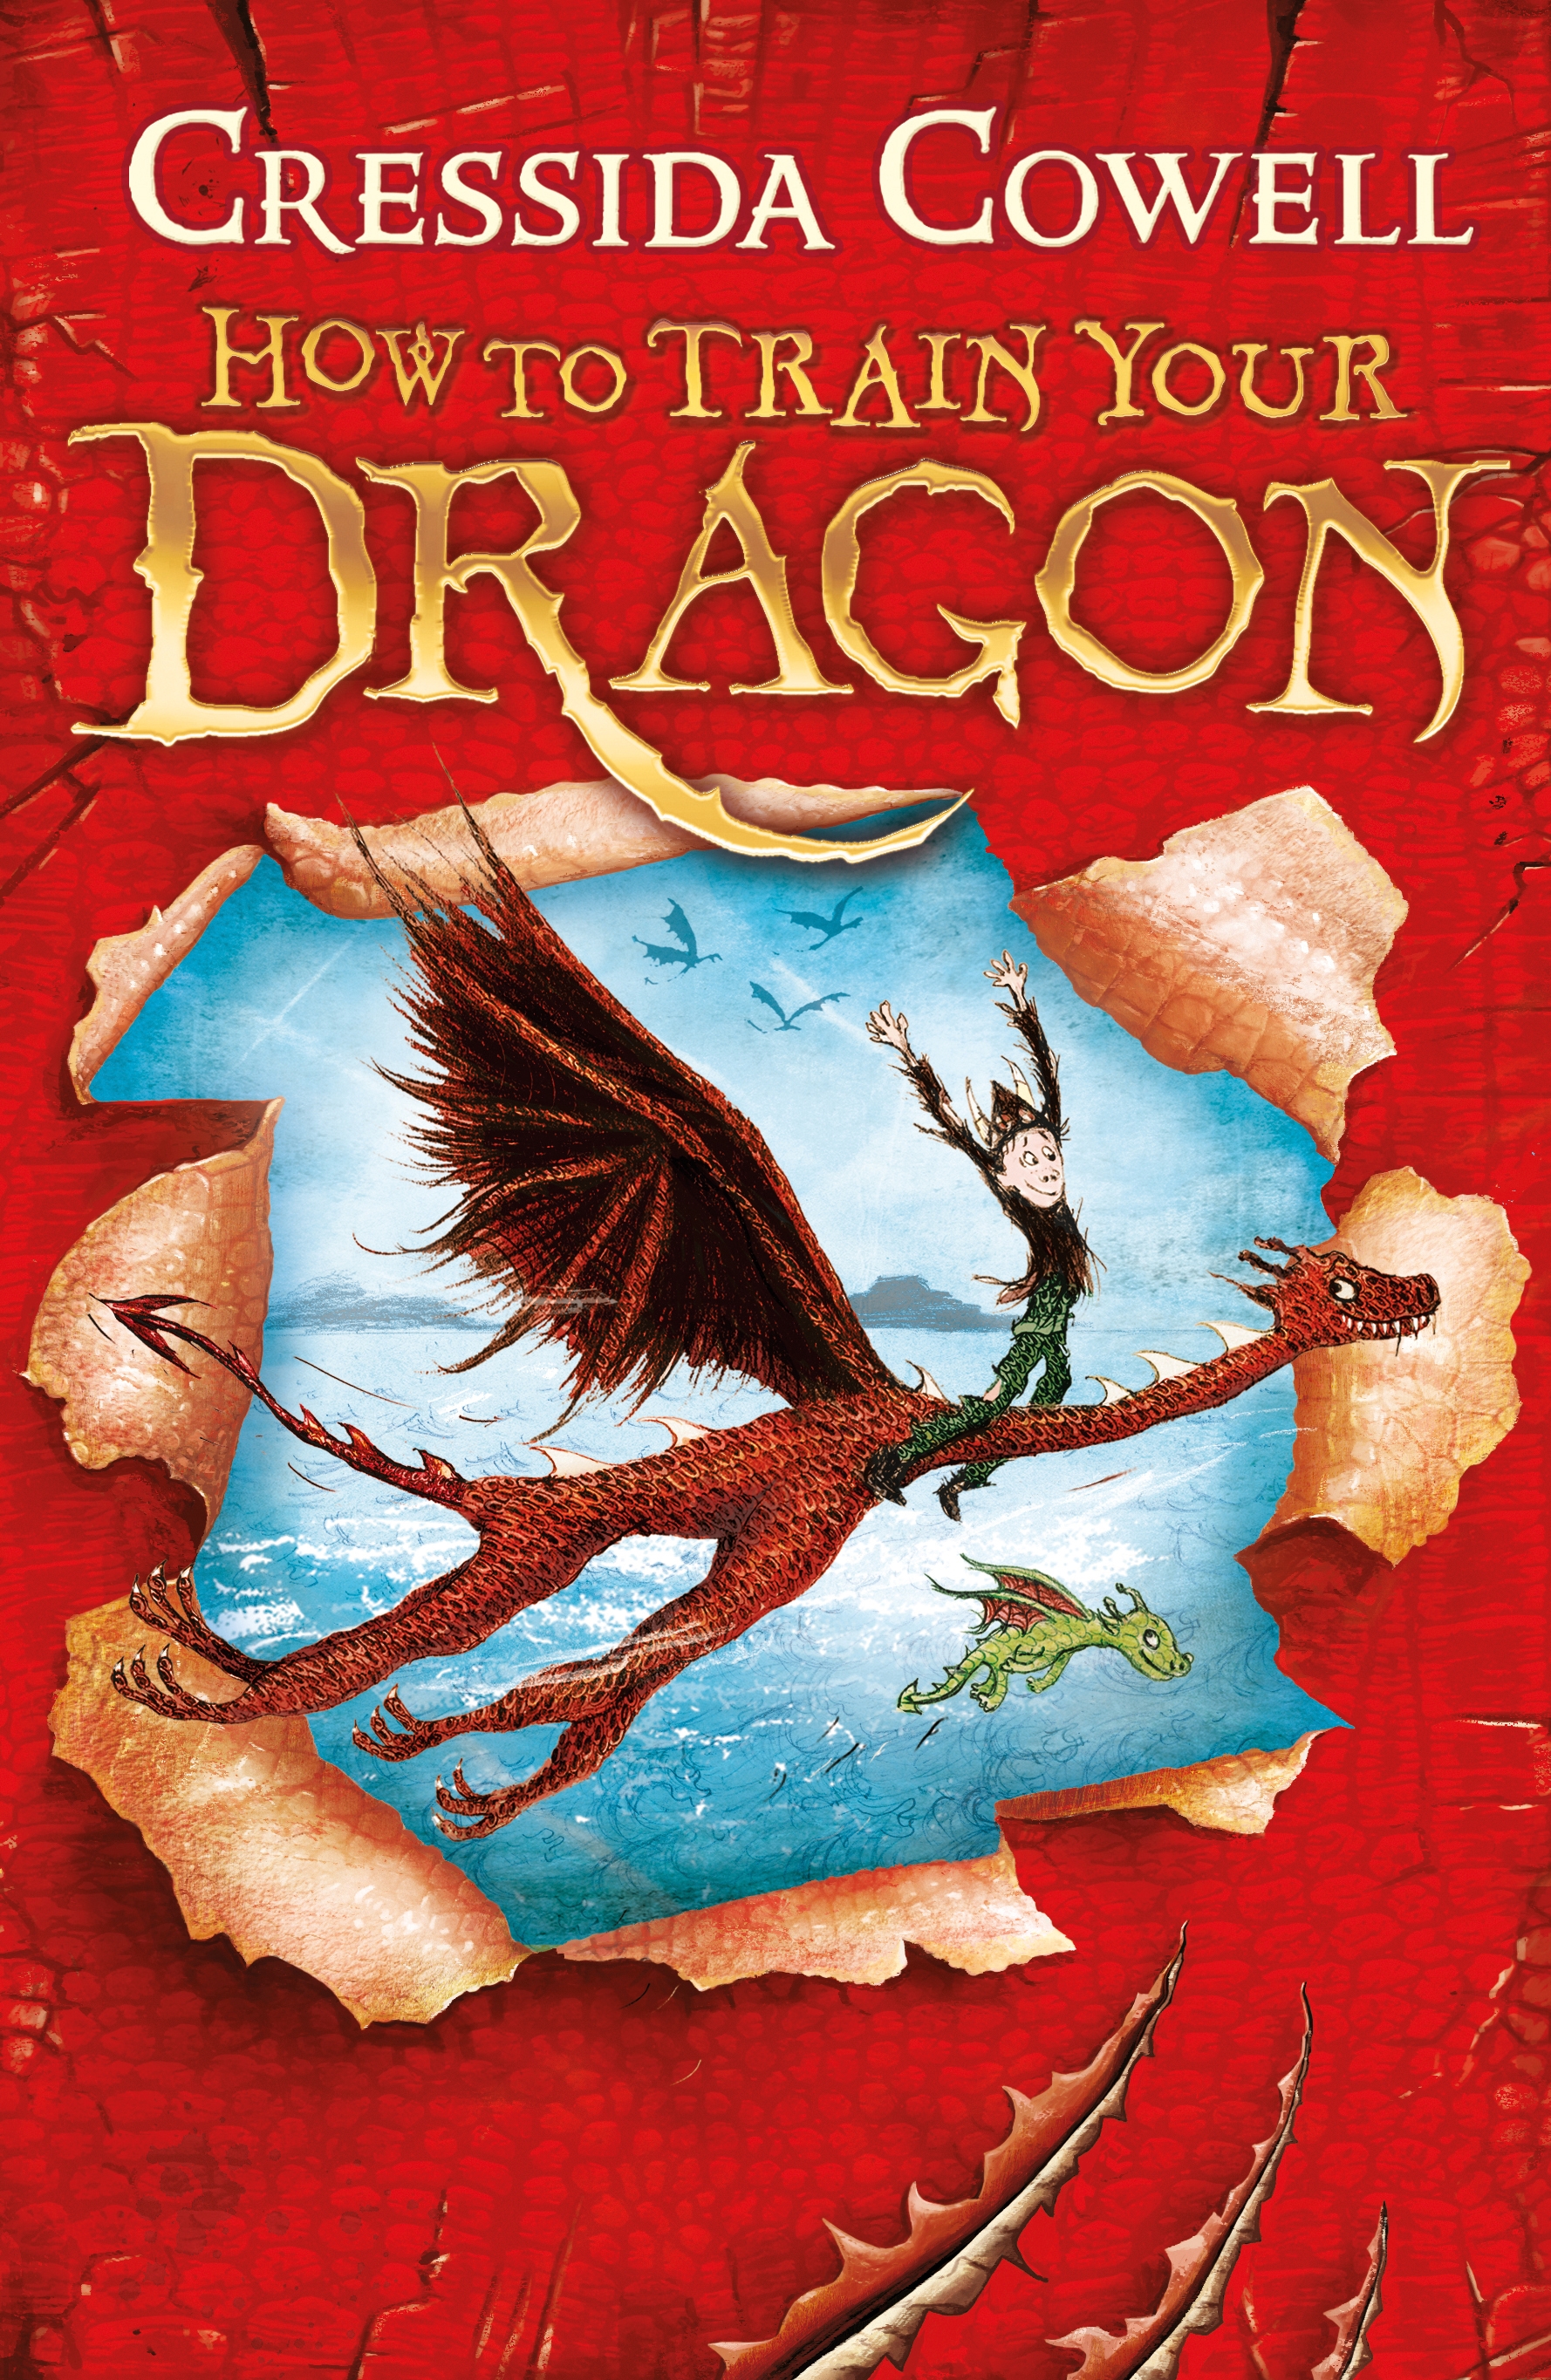 How to Train Your Dragon by Cressida Cowell | Hachette Childrens UK